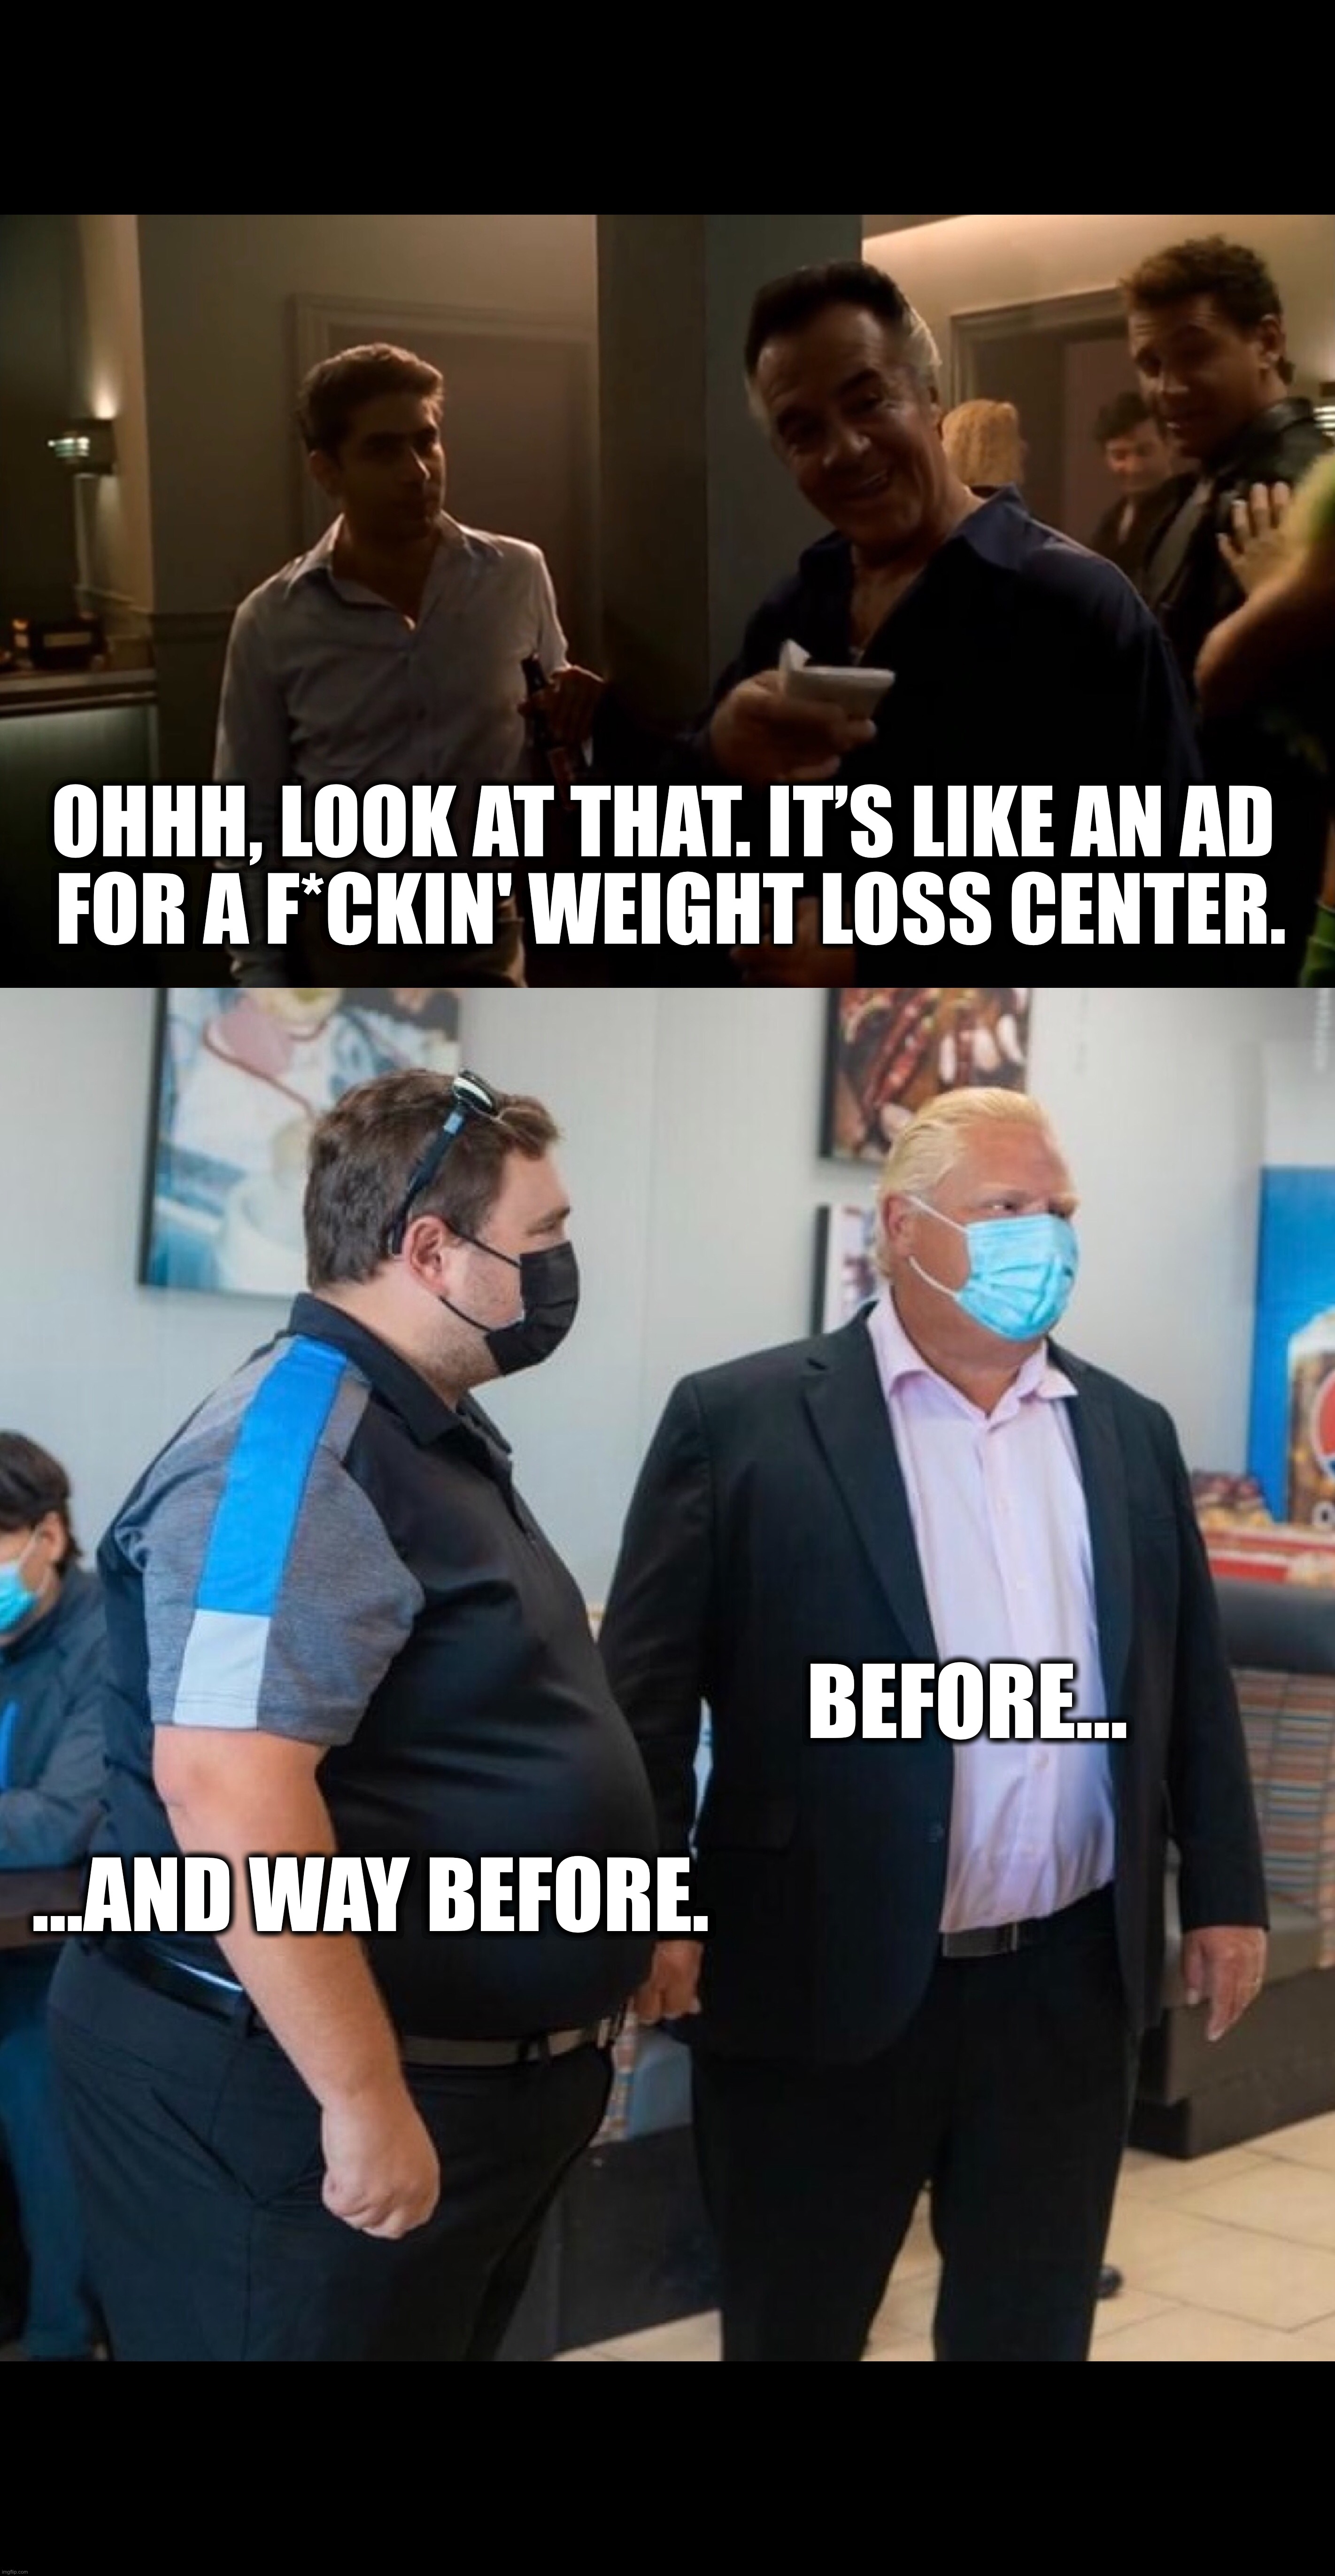 Premier of Ontario Doug Ford… | OHHH, LOOK AT THAT. IT’S LIKE AN AD 
FOR A F*CKIN' WEIGHT LOSS CENTER. BEFORE…; …AND WAY BEFORE. | image tagged in meanwhile in canada,doug ford,covid-19,face mask,covid vaccine,china virus | made w/ Imgflip meme maker